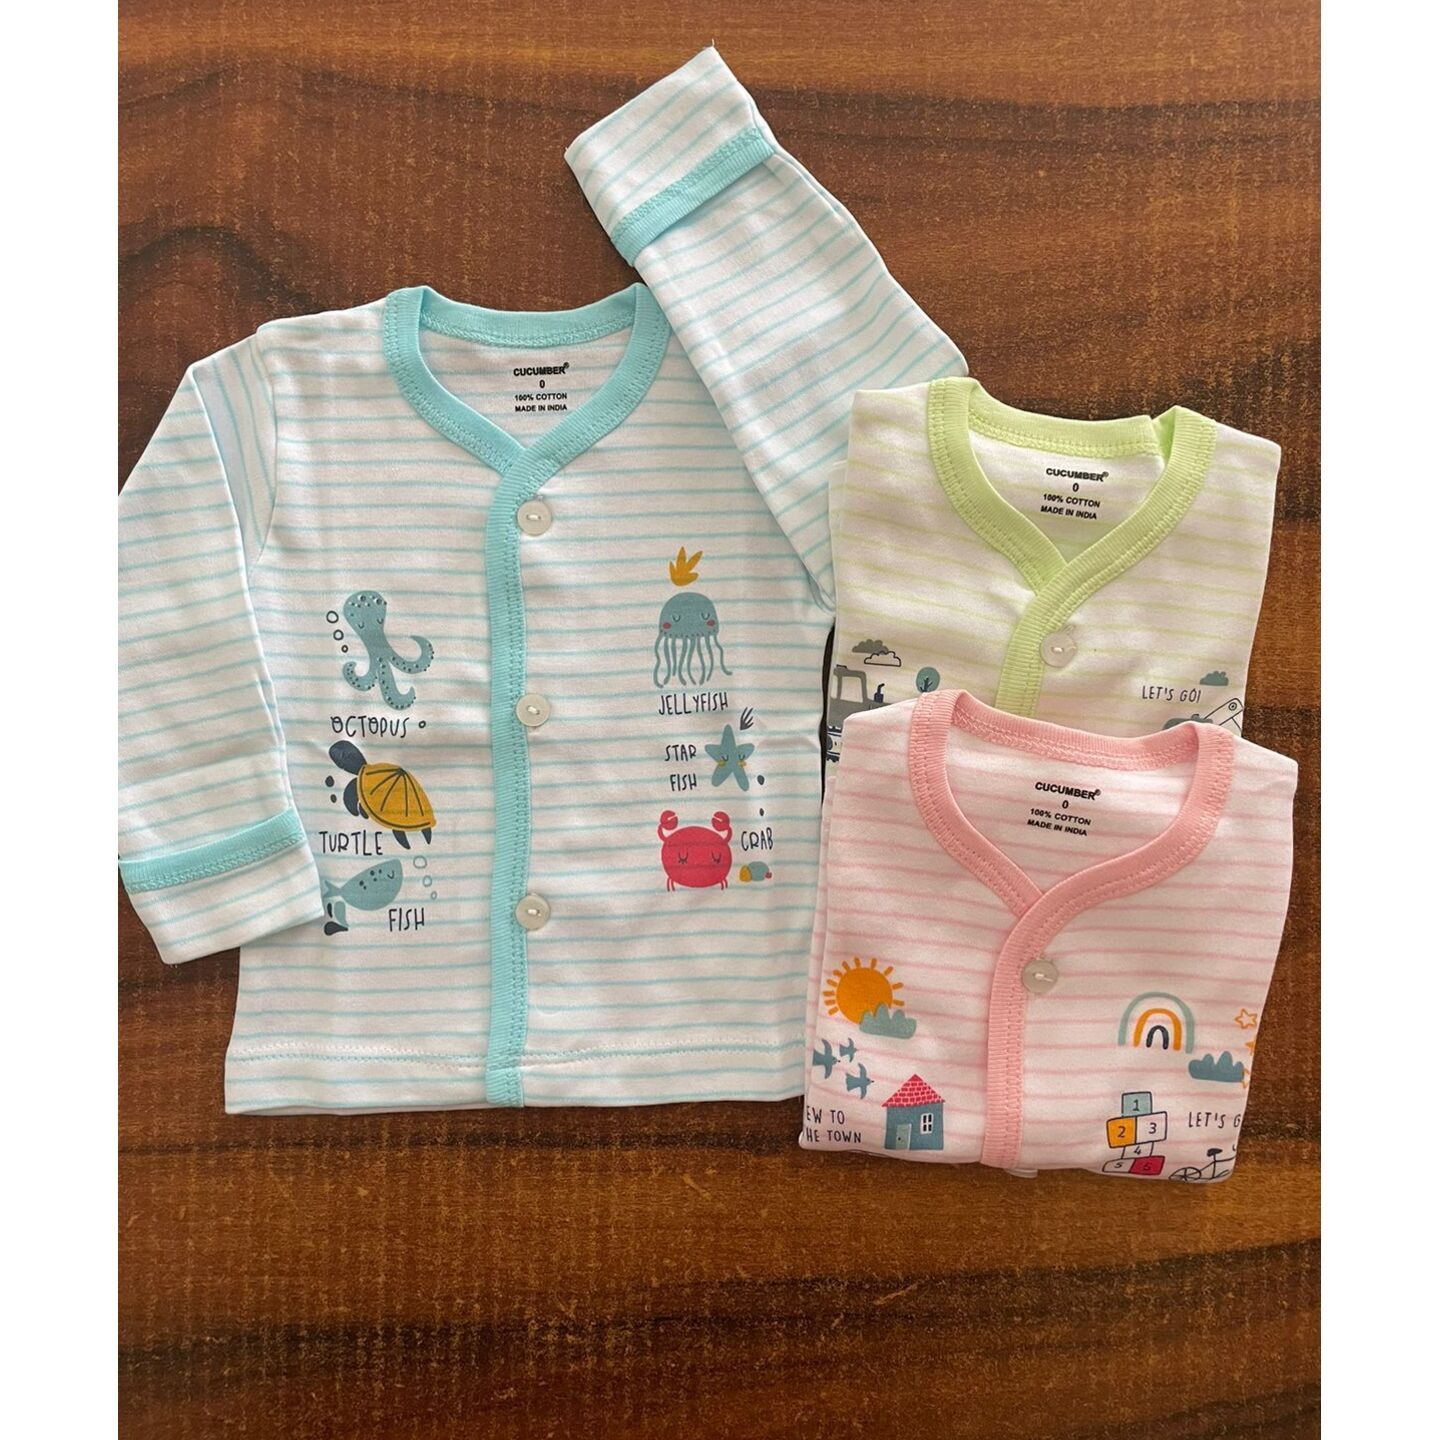 Cucumber Full Sleeves Tops Pack of 3 Rs 540 Only (New Born Size) Mix Colors